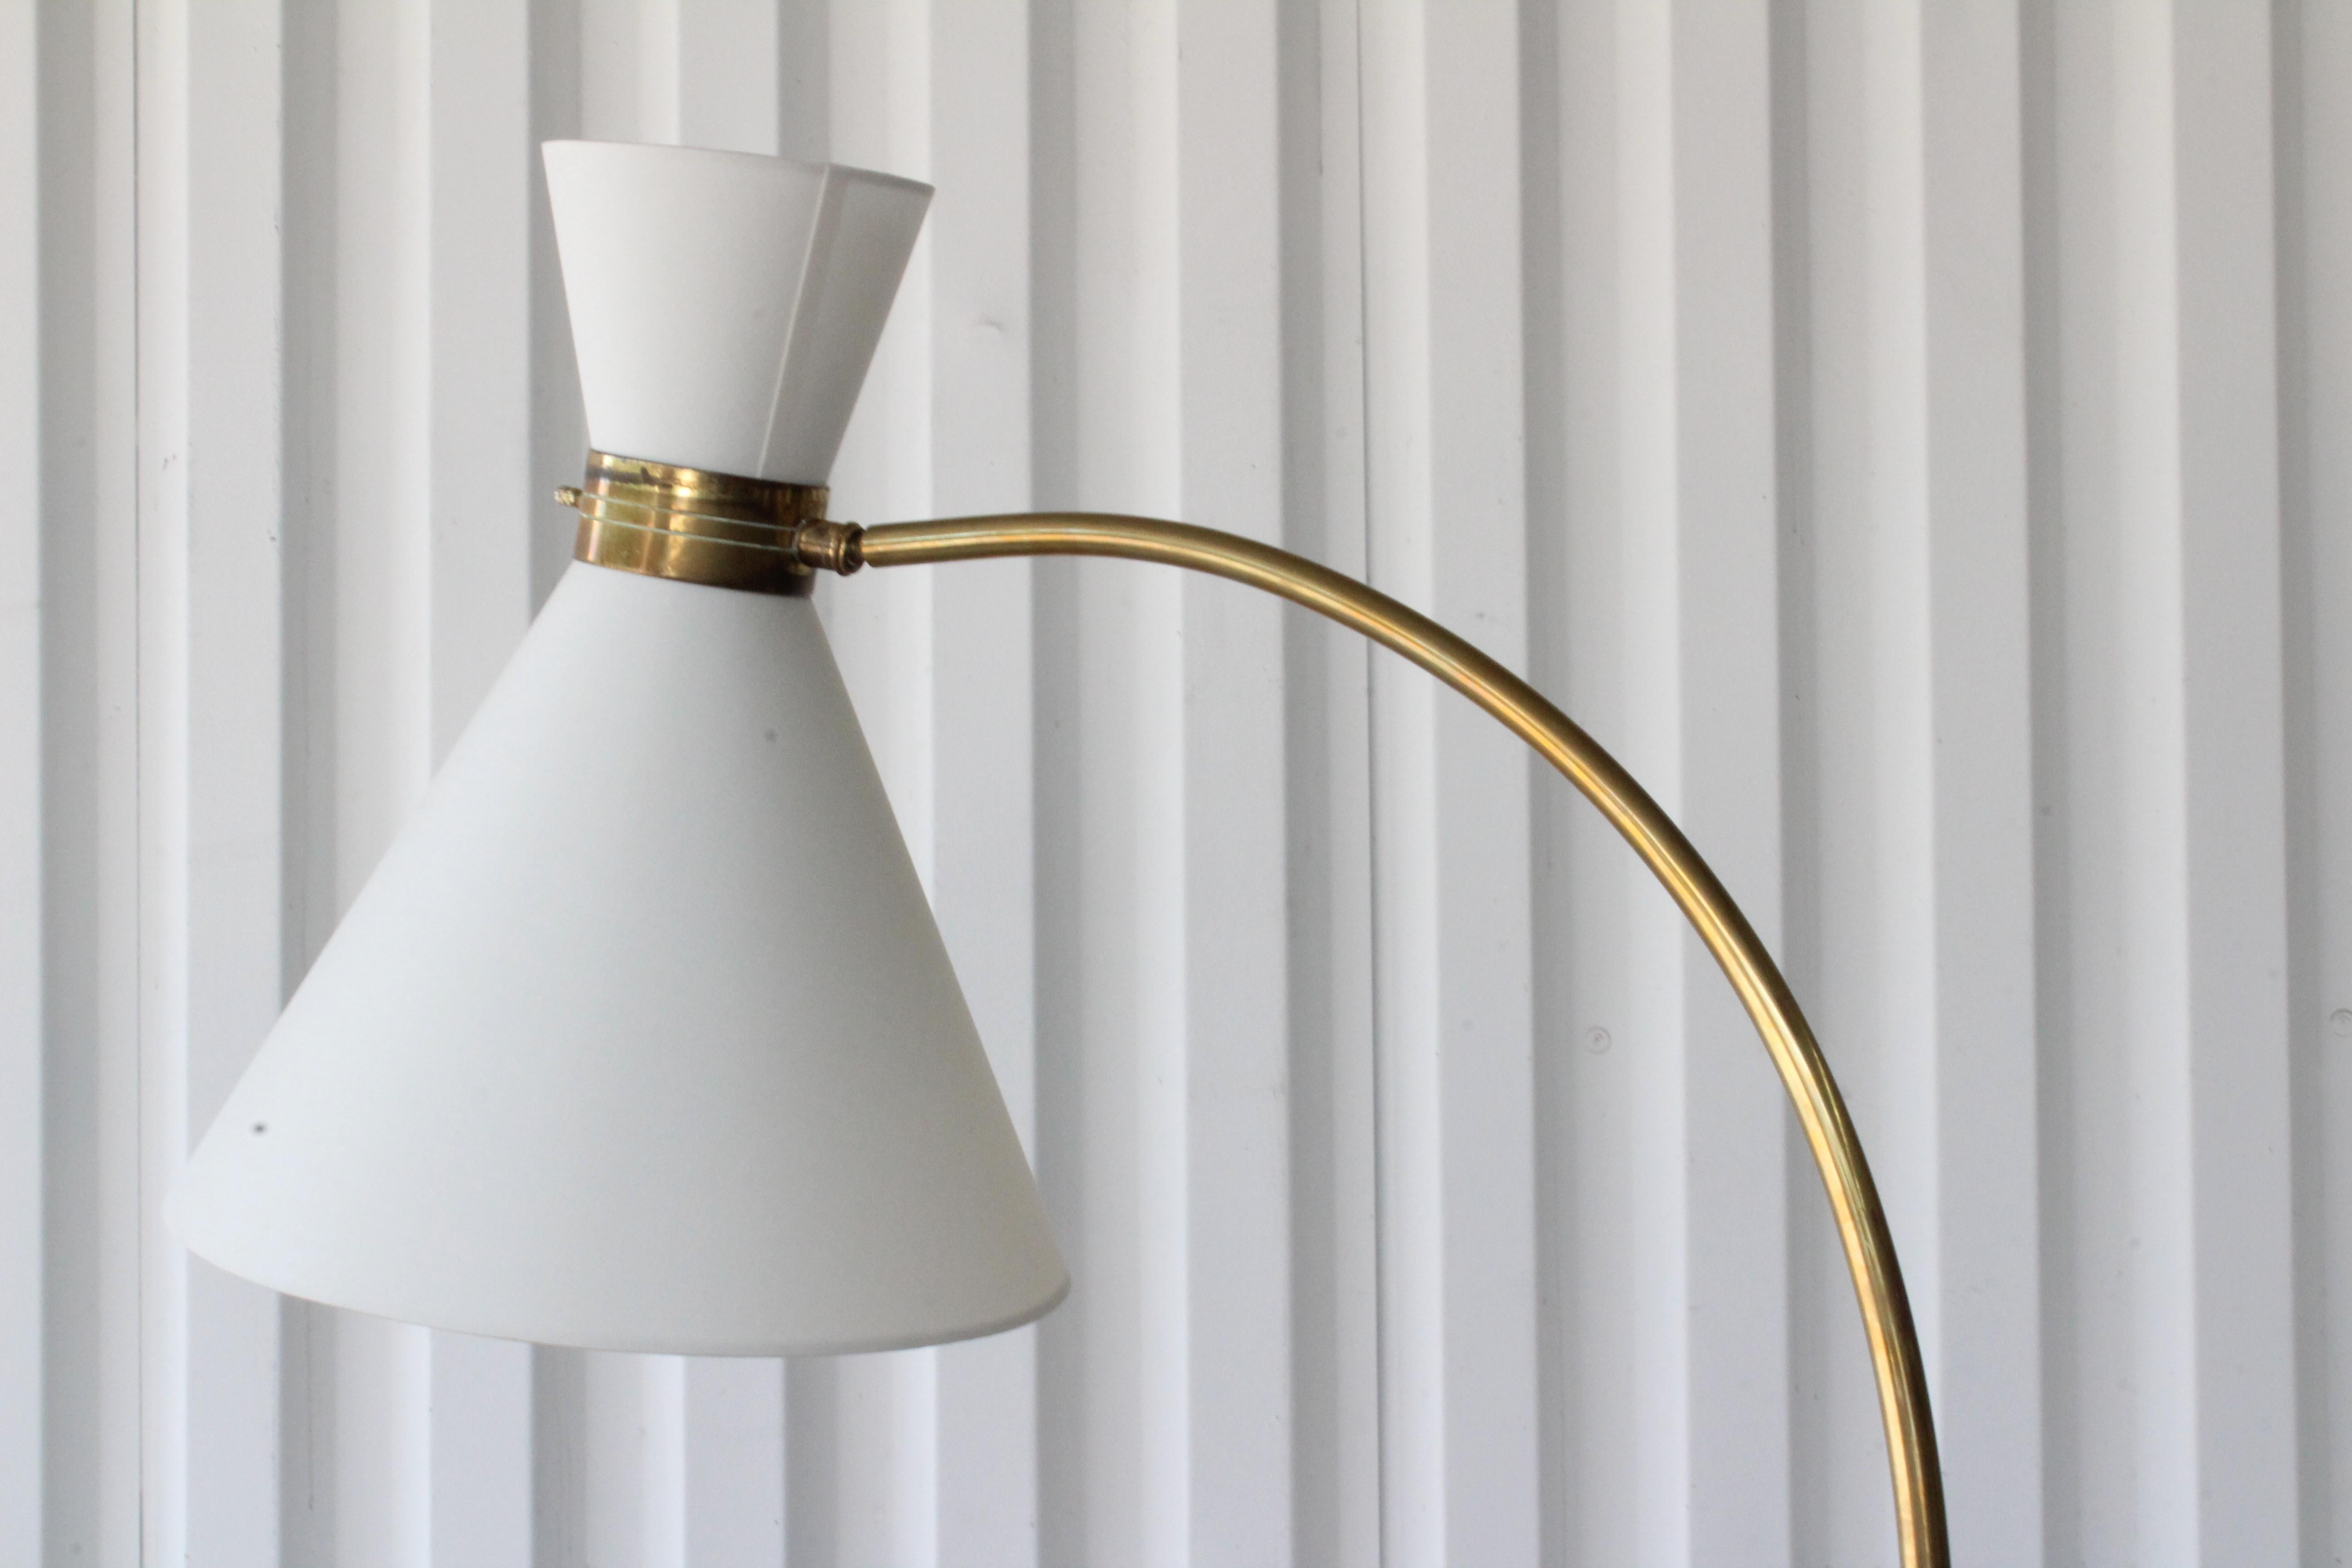 Vintage 1950s floor lamp by Maison Lunel, France. Features a brass stem on a red enameled iron base. Newly rewired and fitted with new custom shades in silk. In excellent condition with a nice patina to the brass and iron base.